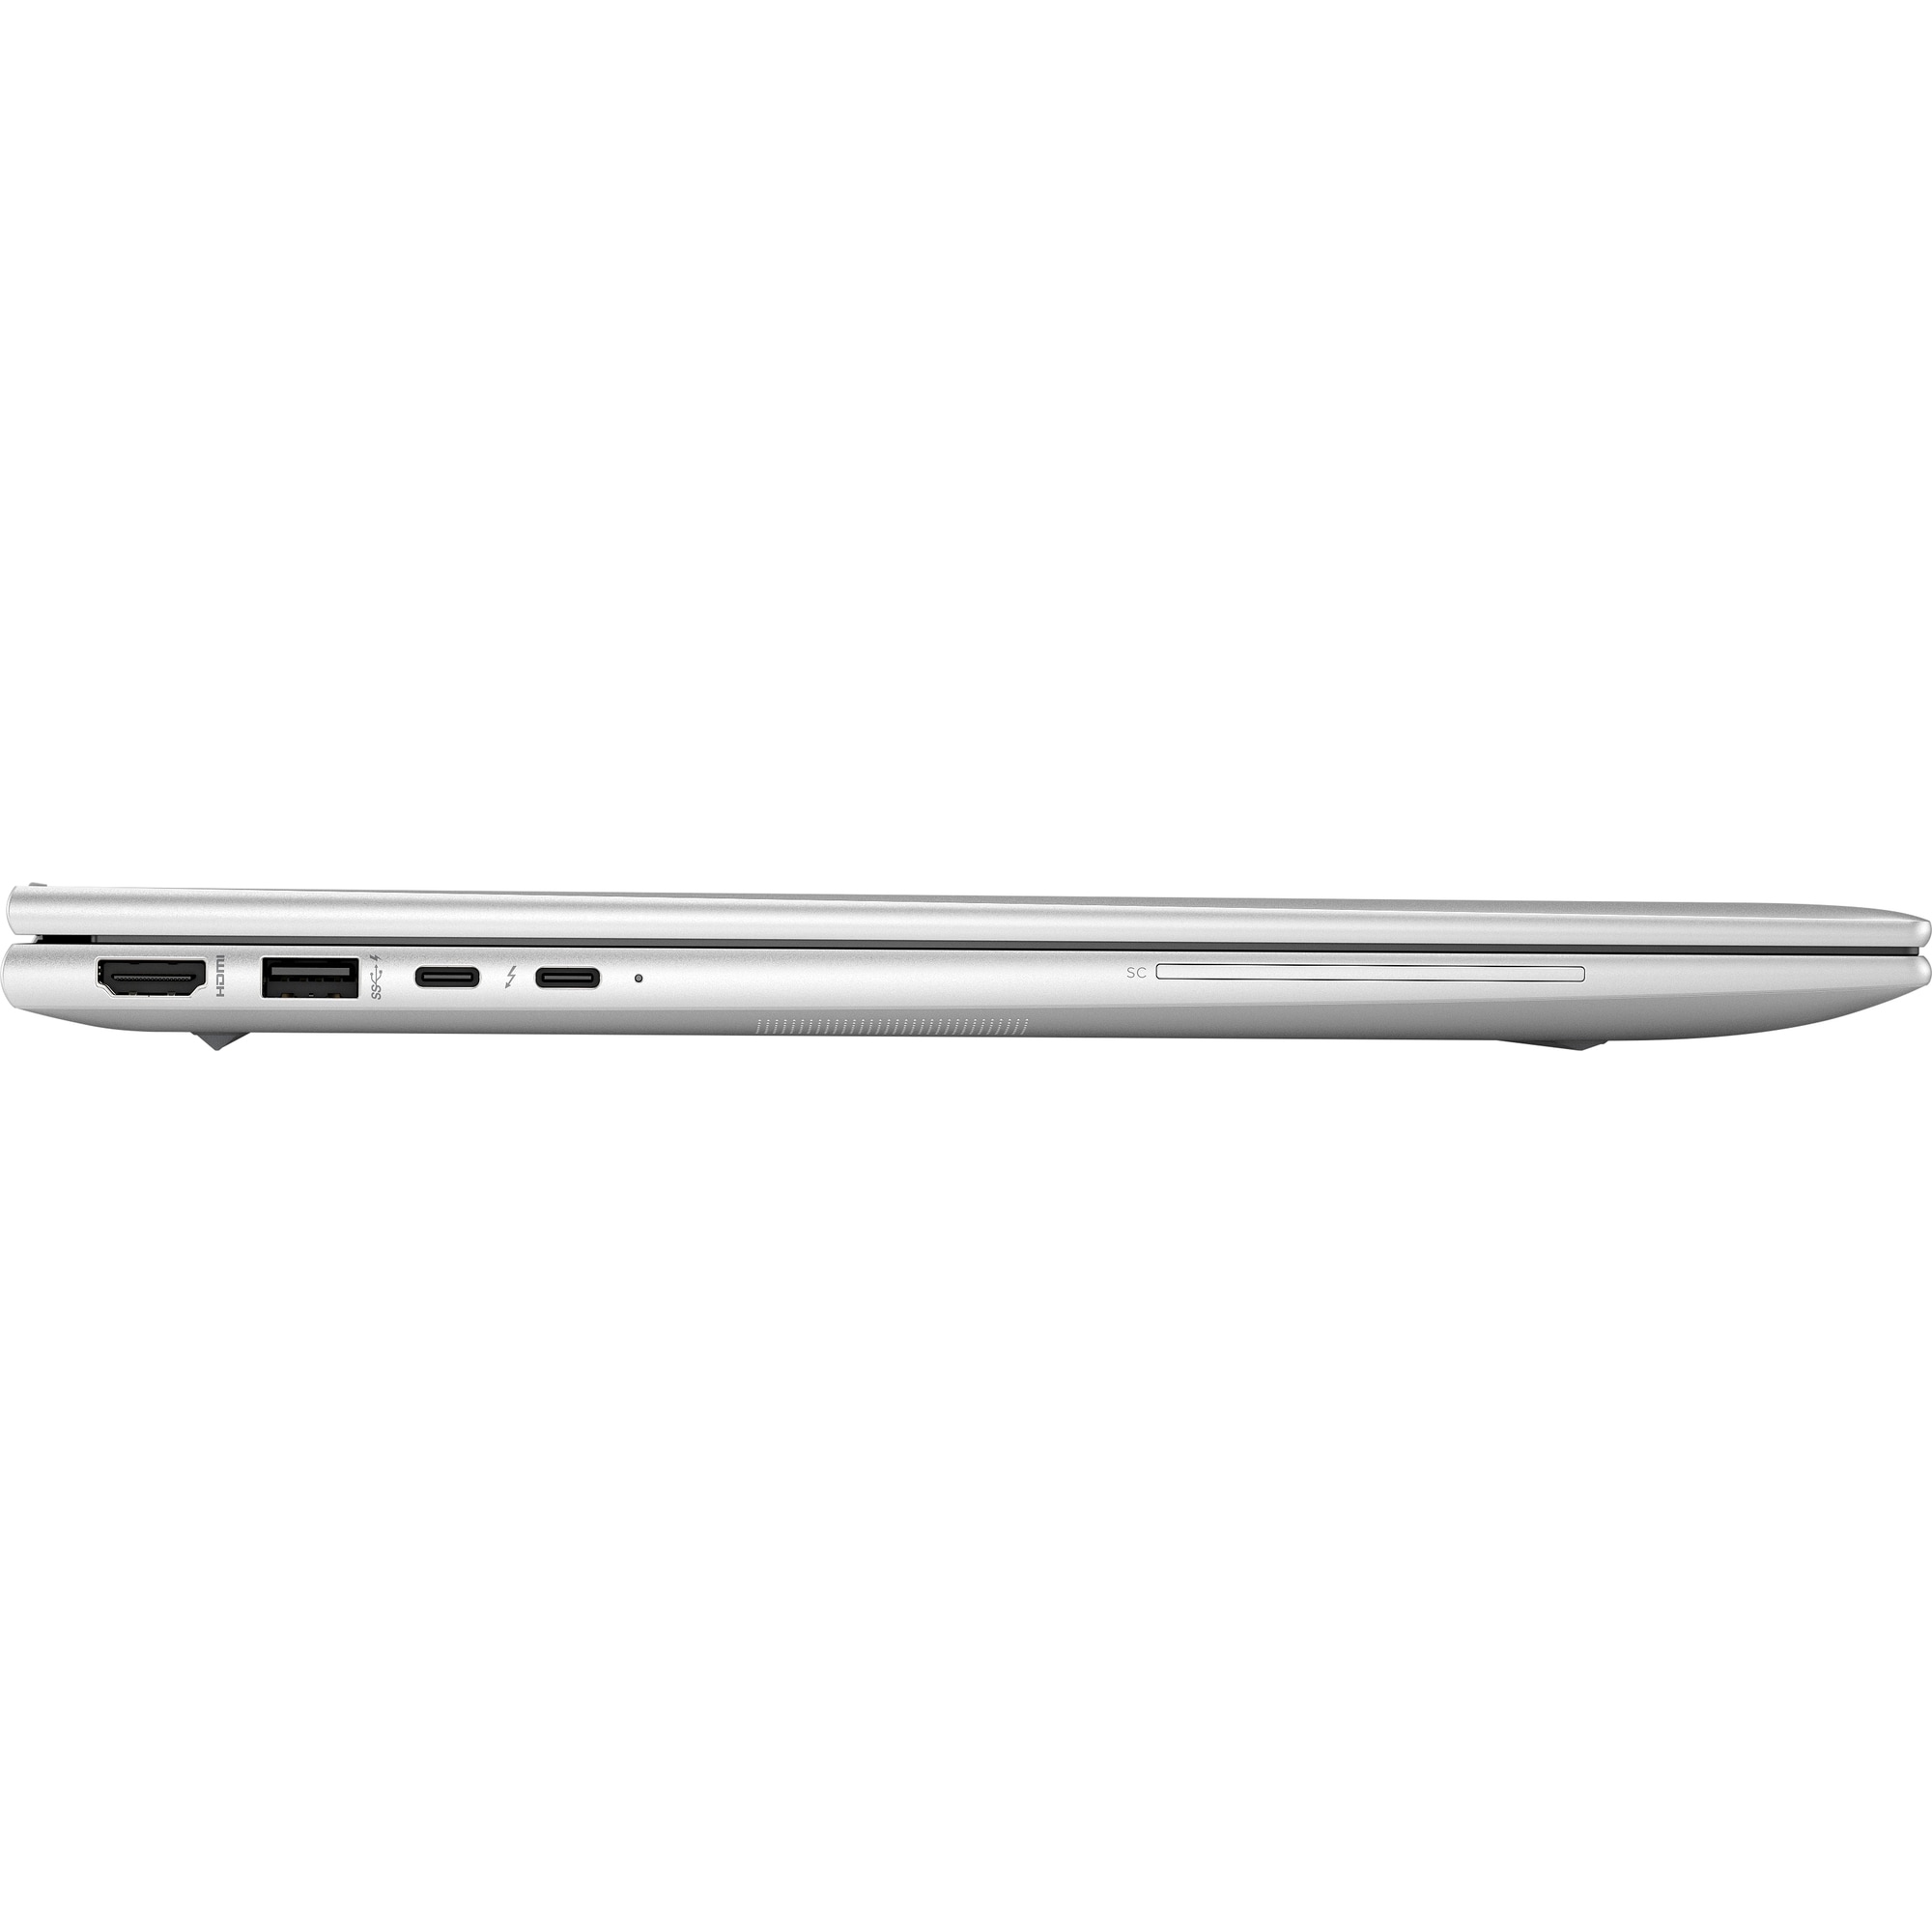 HP NTB EliteBook 860 G10 i5-1340P 16WUXGA 400 IR,  2x8GB,  512GB,  ax,  BT,  FpS,  bckl kbd,  76WHr,  Win11Pro,  3y onsite0 